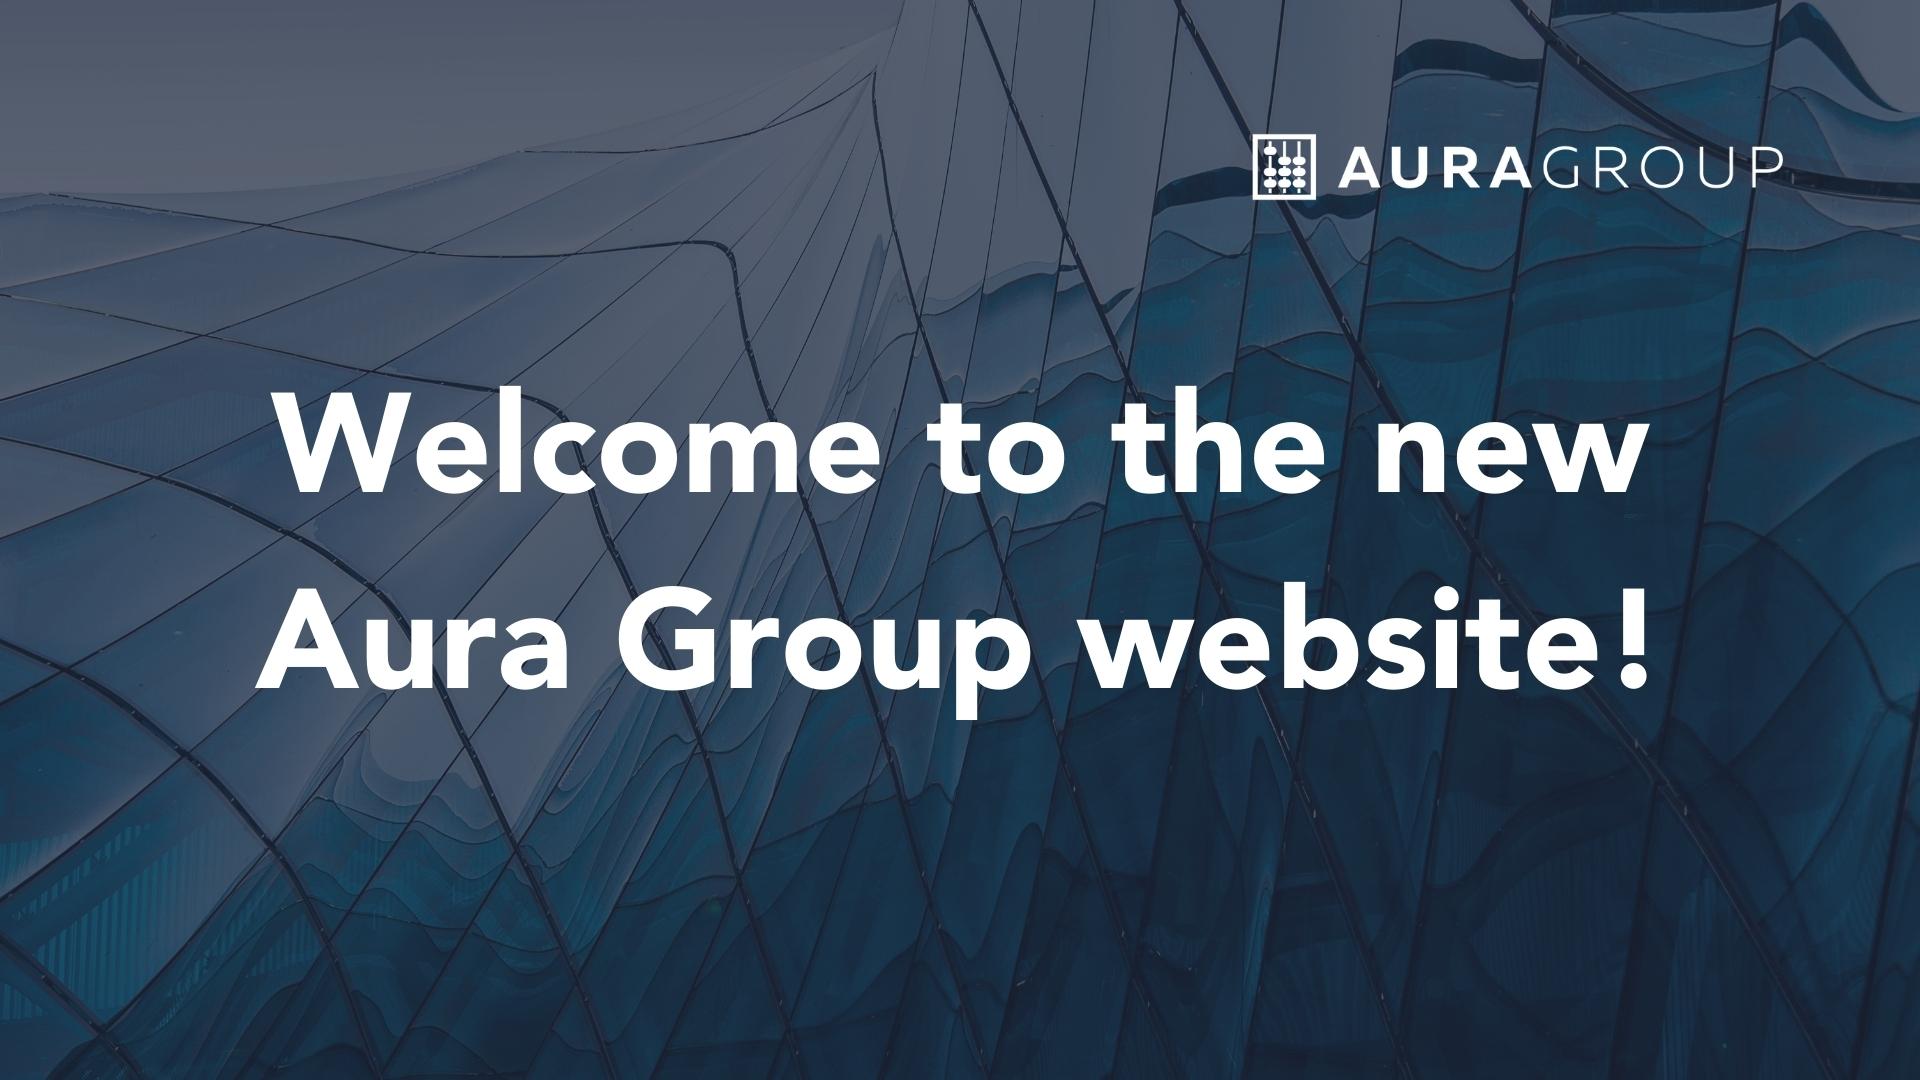 Welcome to the Aura Group website banner with reflective building in the background